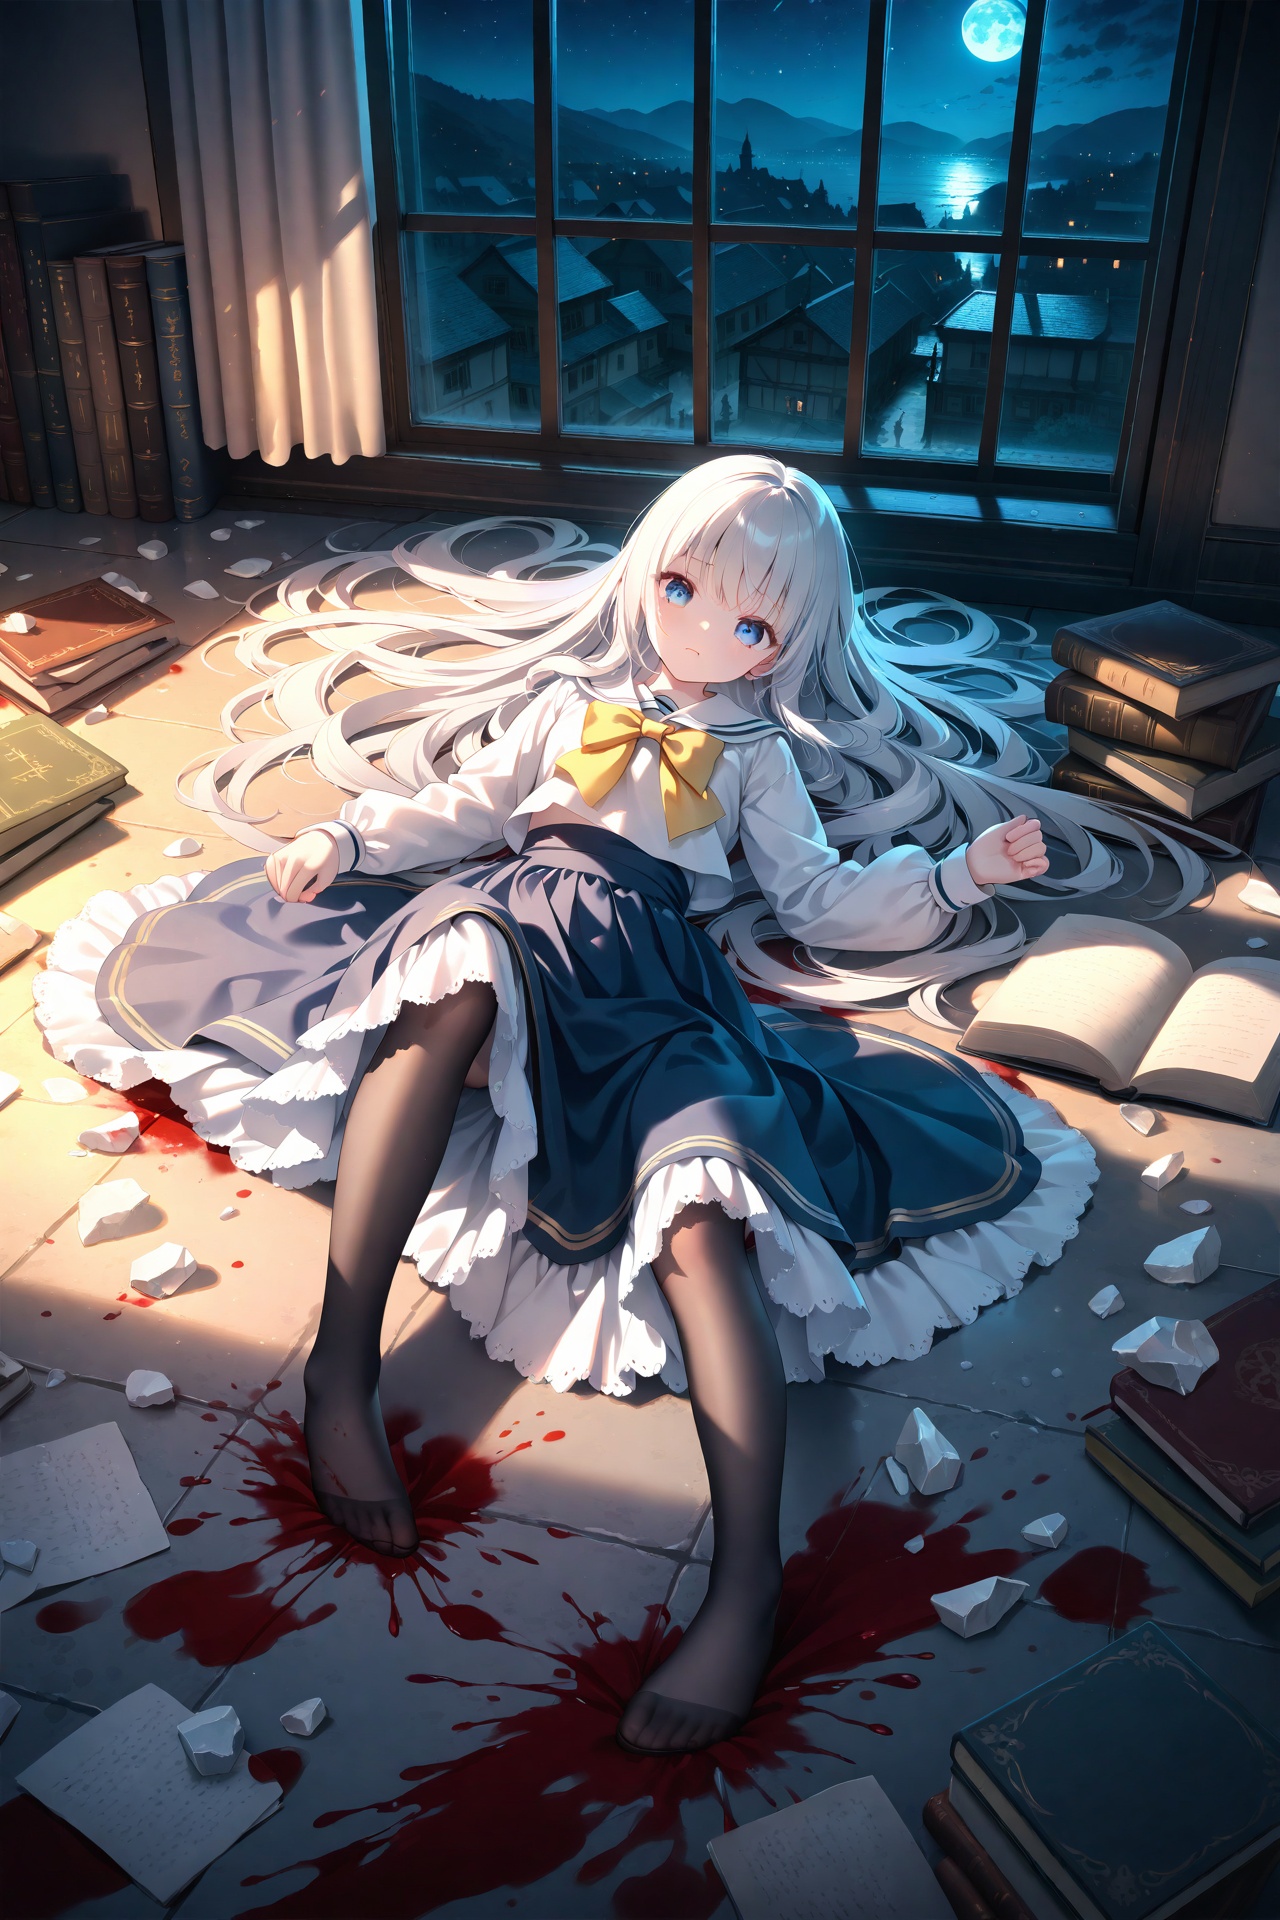 (masterpiece),(best quality),illustration,ultra detailed,hdr,Depth of field,(colorful),loli,finely detail,dark,Depth of field,masterpiece,extremely detailed CG unity 8k wallpaper,best quality,high resolution illustration,Amazing,highres,intricate detail,best illumination,best shadow,an extremely delicate and beautiful,night,Broken glass fragments,Middle Ages,Books scattered on the ground,window,wind,White curtain,textbook,books,1 girl,There's blood on the feet,blood on the legs,solo,extremely delicate and beautiful girls,blue eyes,beautiful detailed eyes,Beautiful dark blue eyes,Lovely face,Black stockings,No shoes,Yellow bow tie,There were shards of glass on the ground,Blood on the ground,white hair,long hair,young,White sailor shirt,medium skirt,